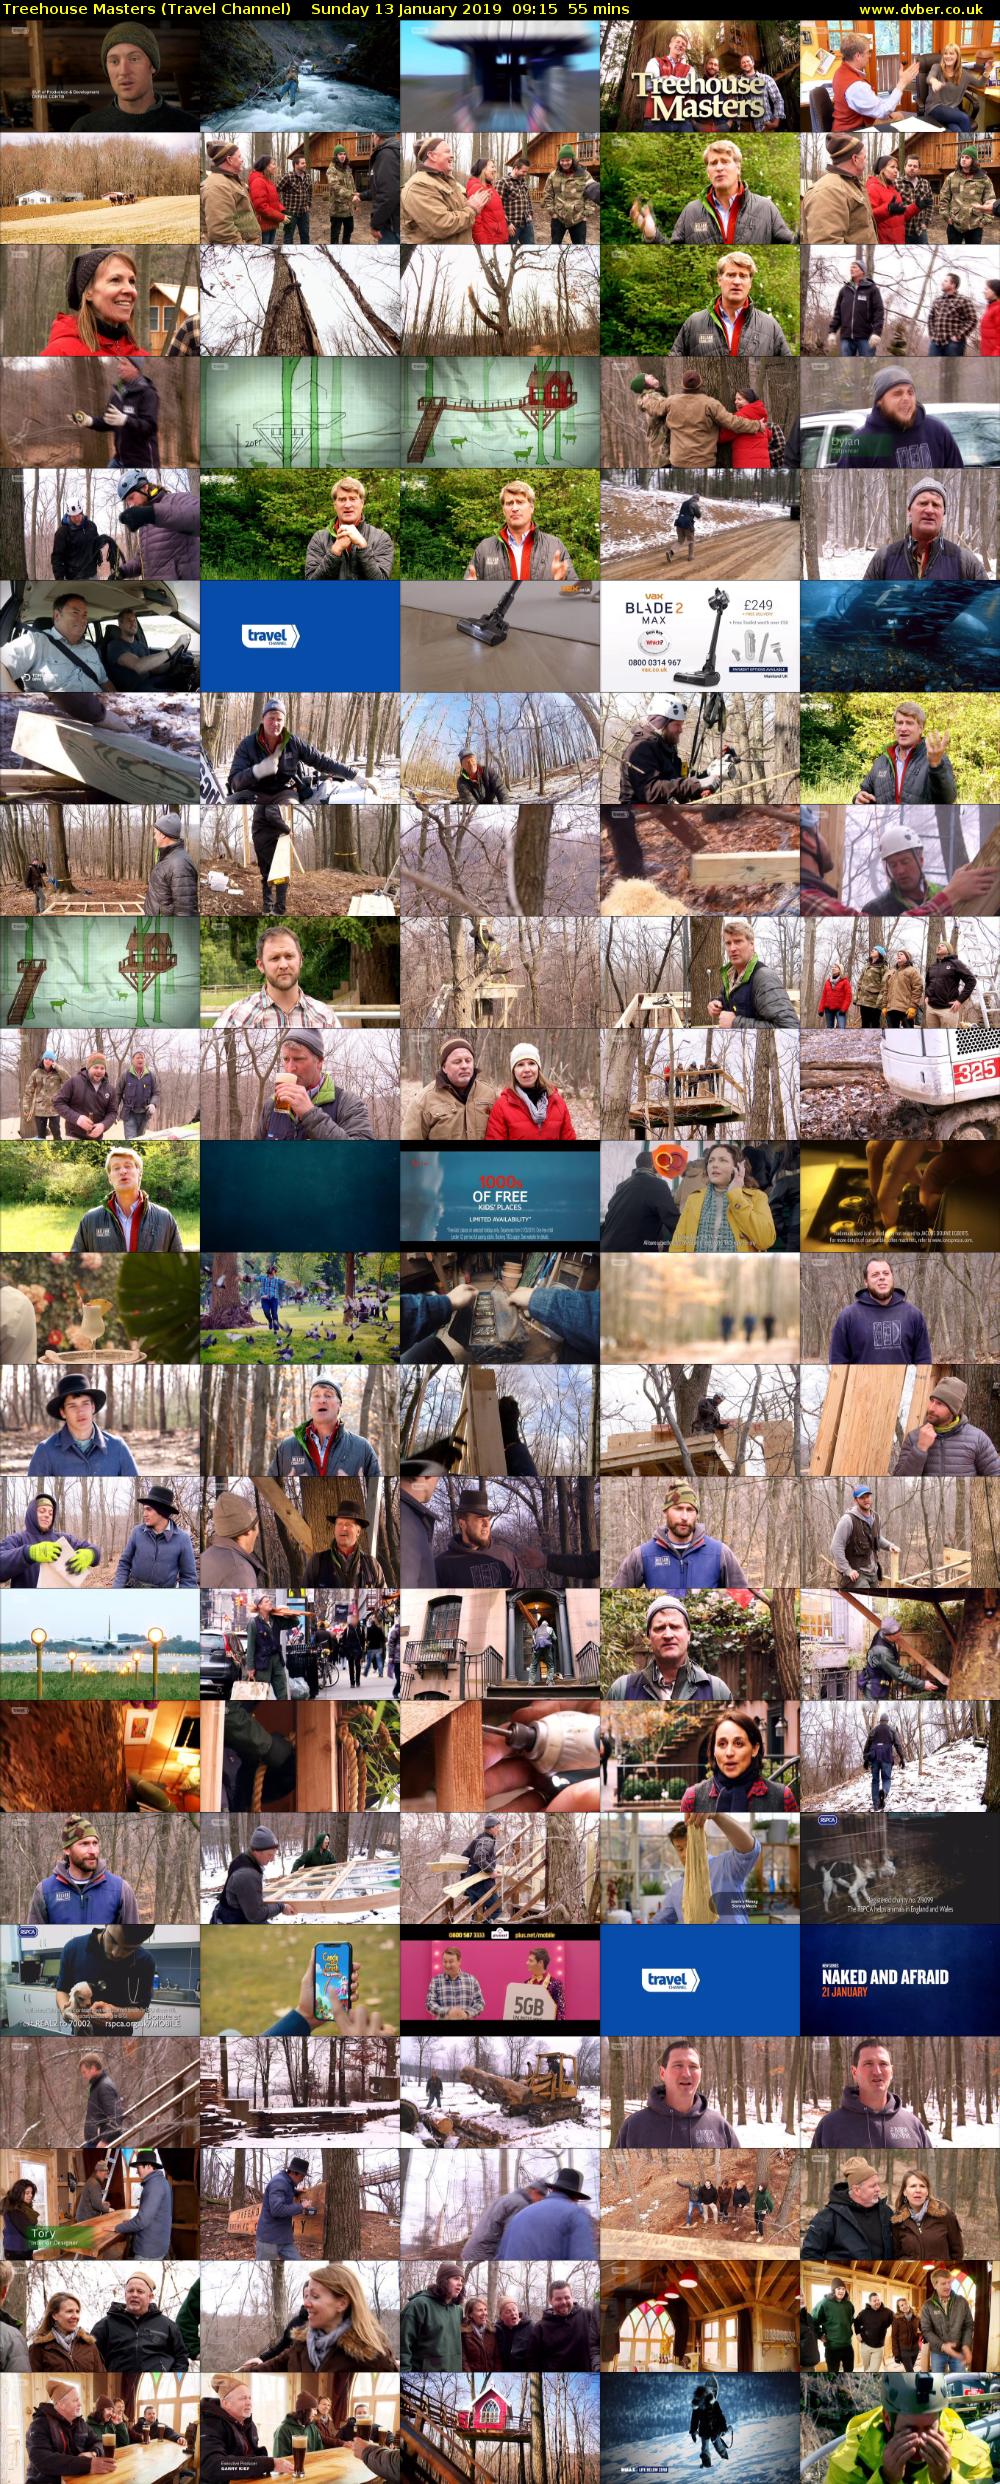 Treehouse Masters (Travel Channel) Sunday 13 January 2019 09:15 - 10:10